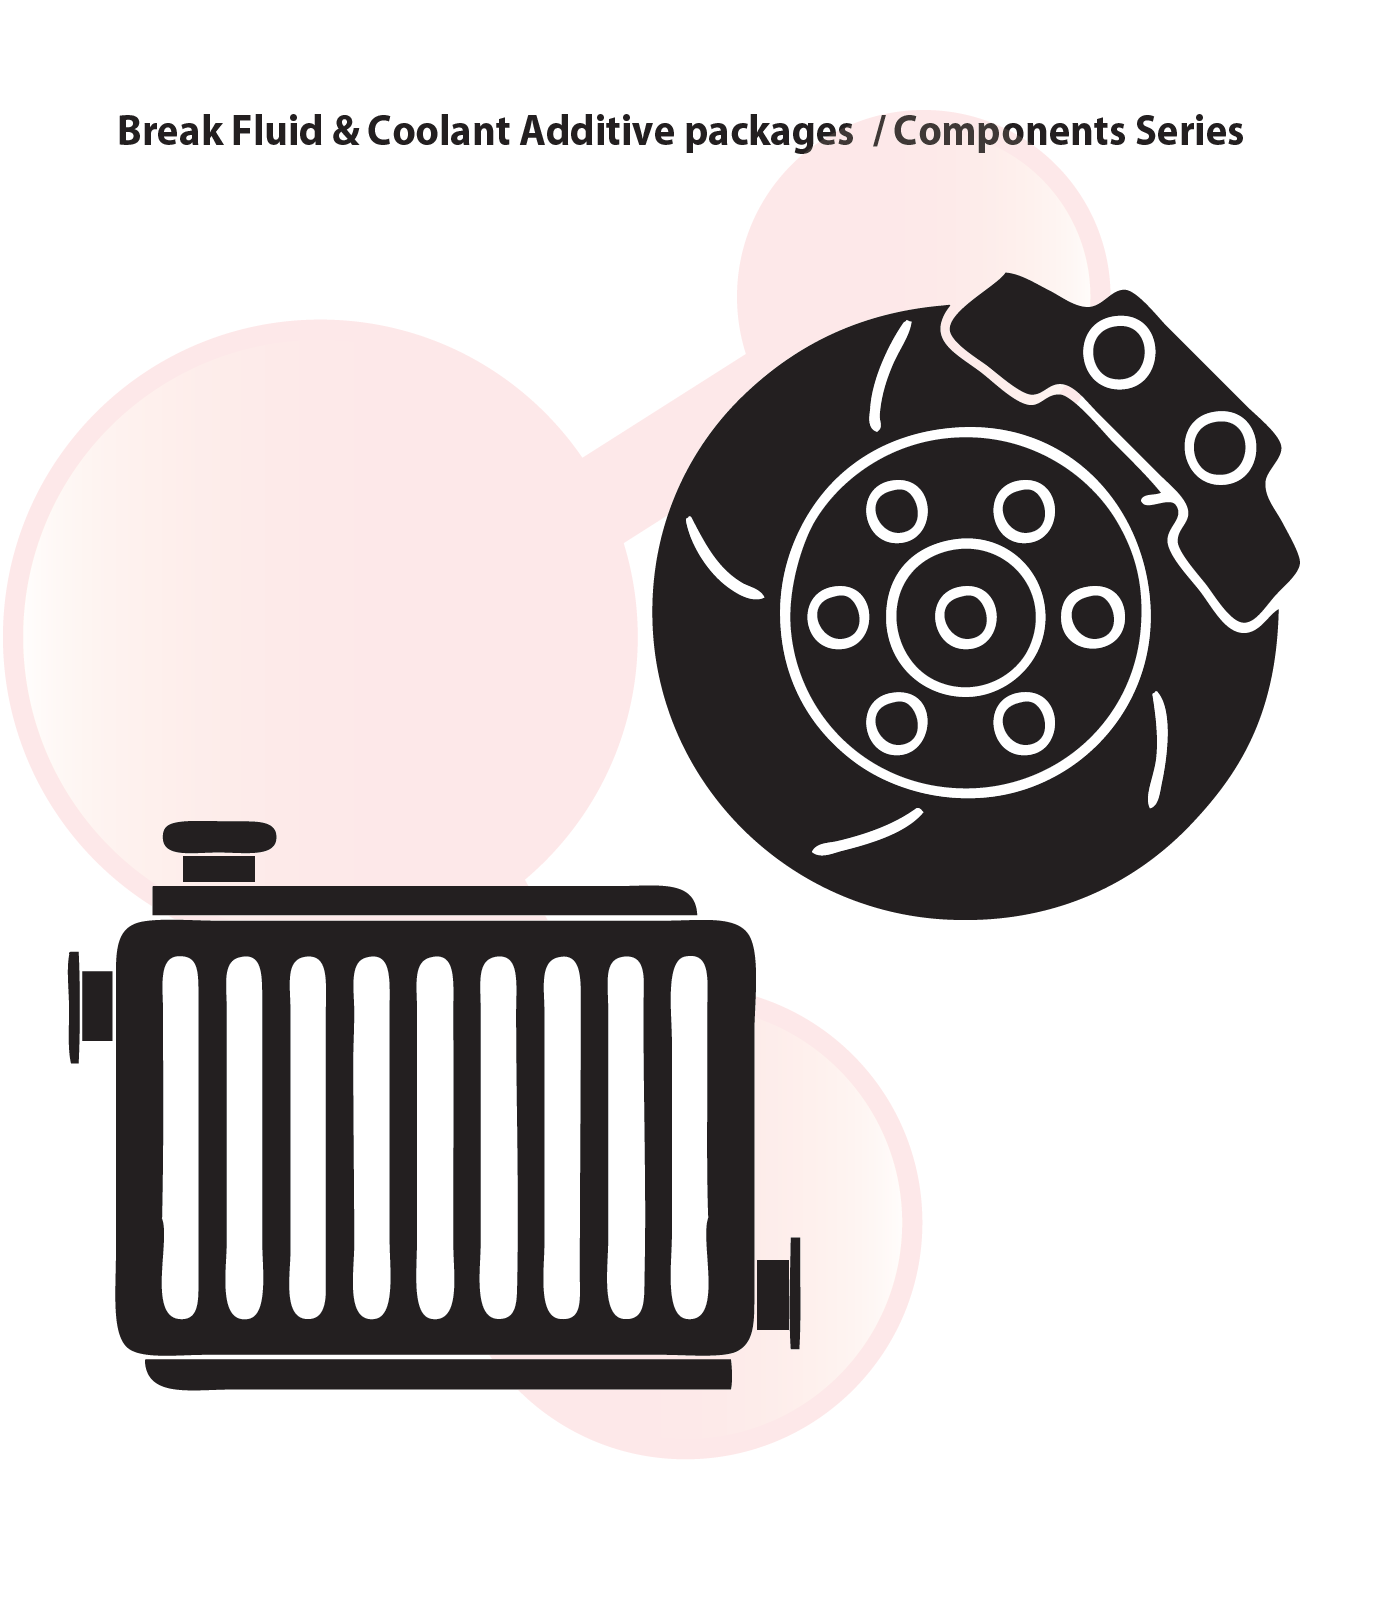 Break Fluid & Coolant Additive packages / Components Series